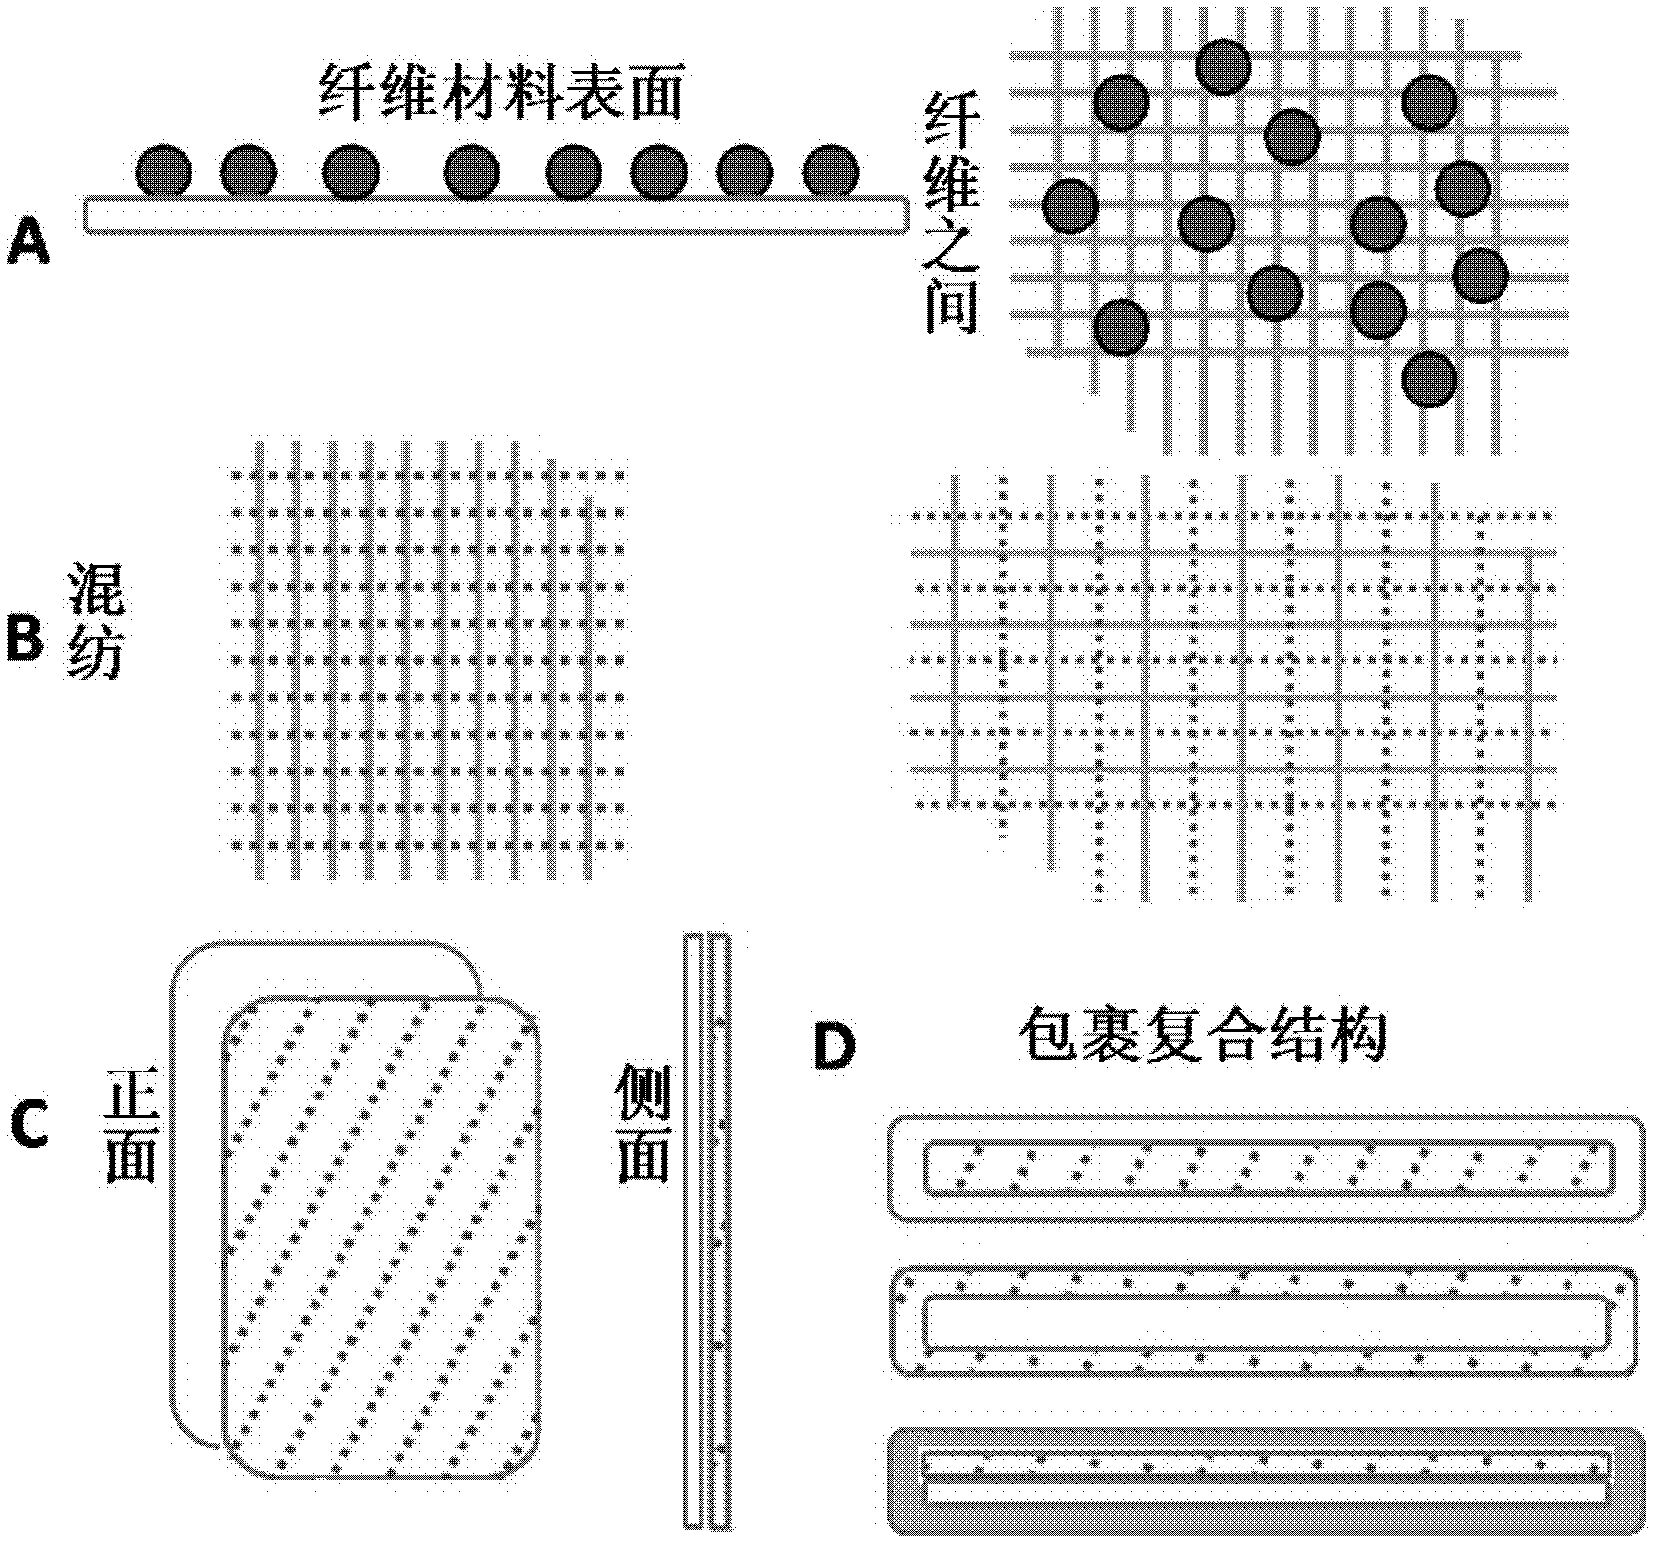 Novel heating fiber material with bidirectional temperature regulating function and preparation method thereof